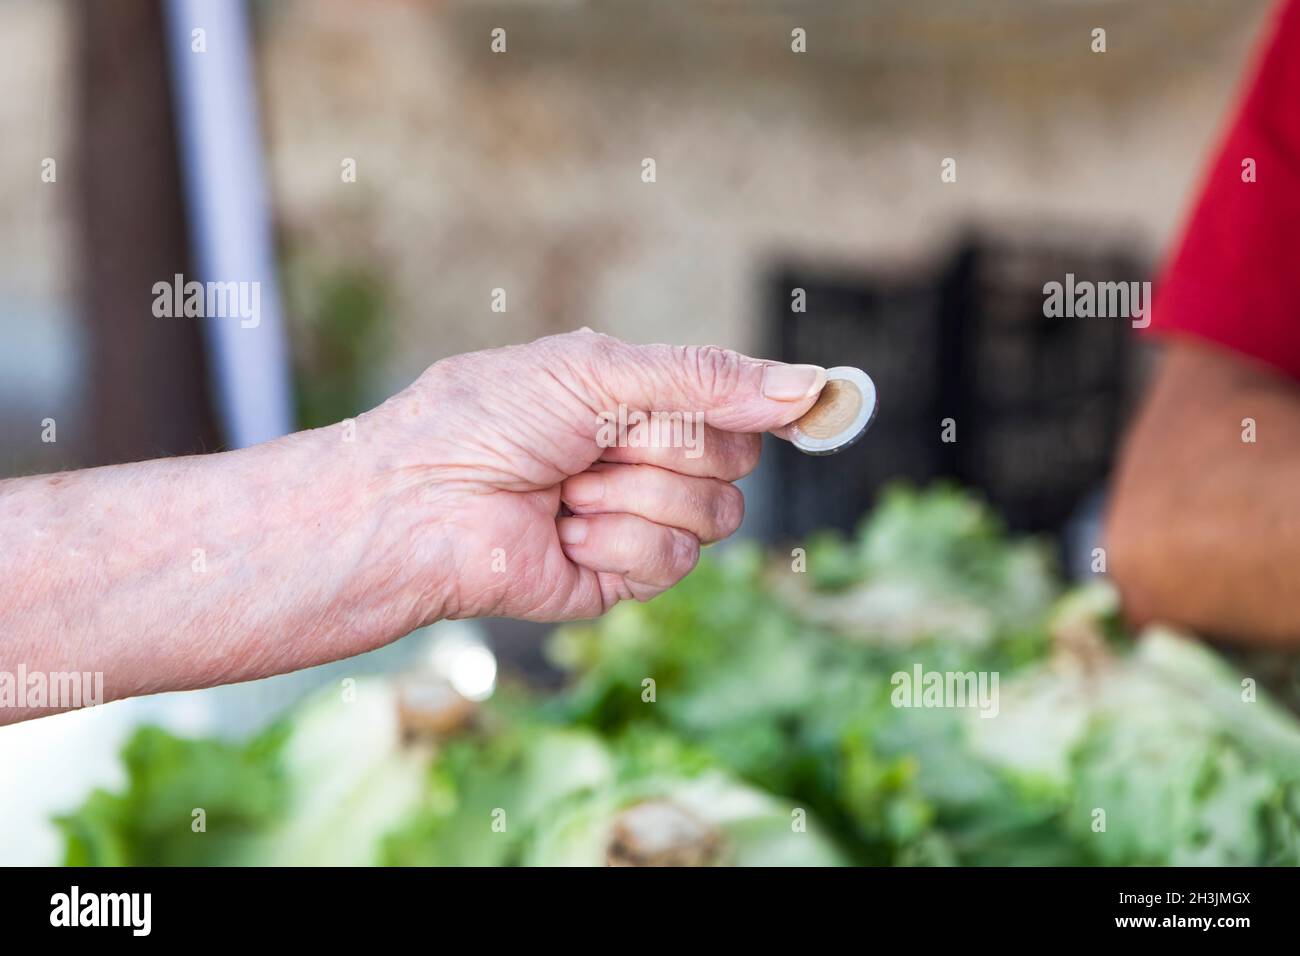 Close up of senior lady's hand paying groceries with a two euros coin Stock Photo